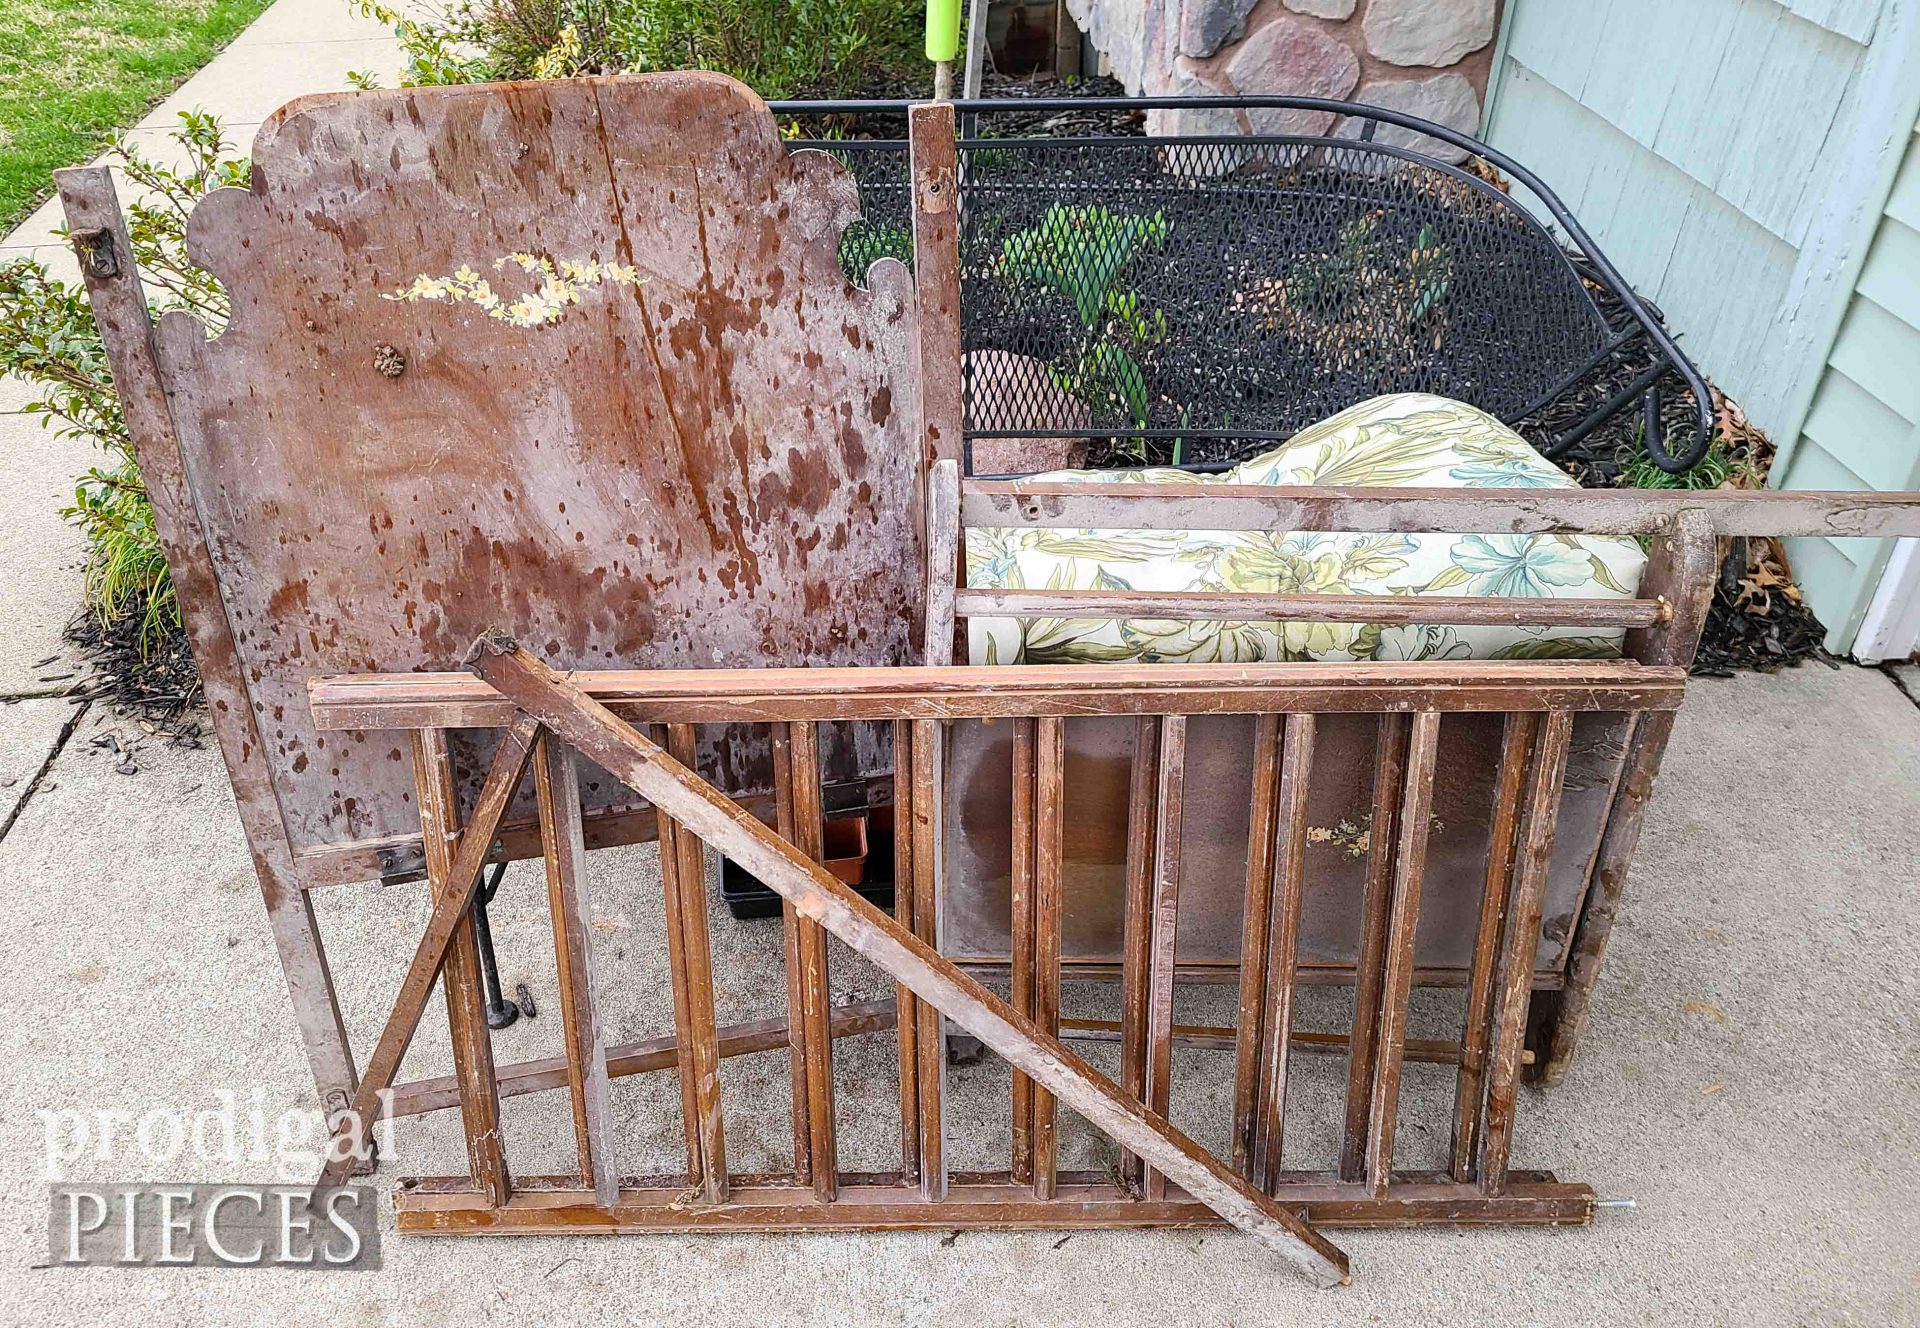 Vintage Baby Crib Before Makeover by Larissa of Prodigal Pieces | prodigalpieces.com #prodigalpieces